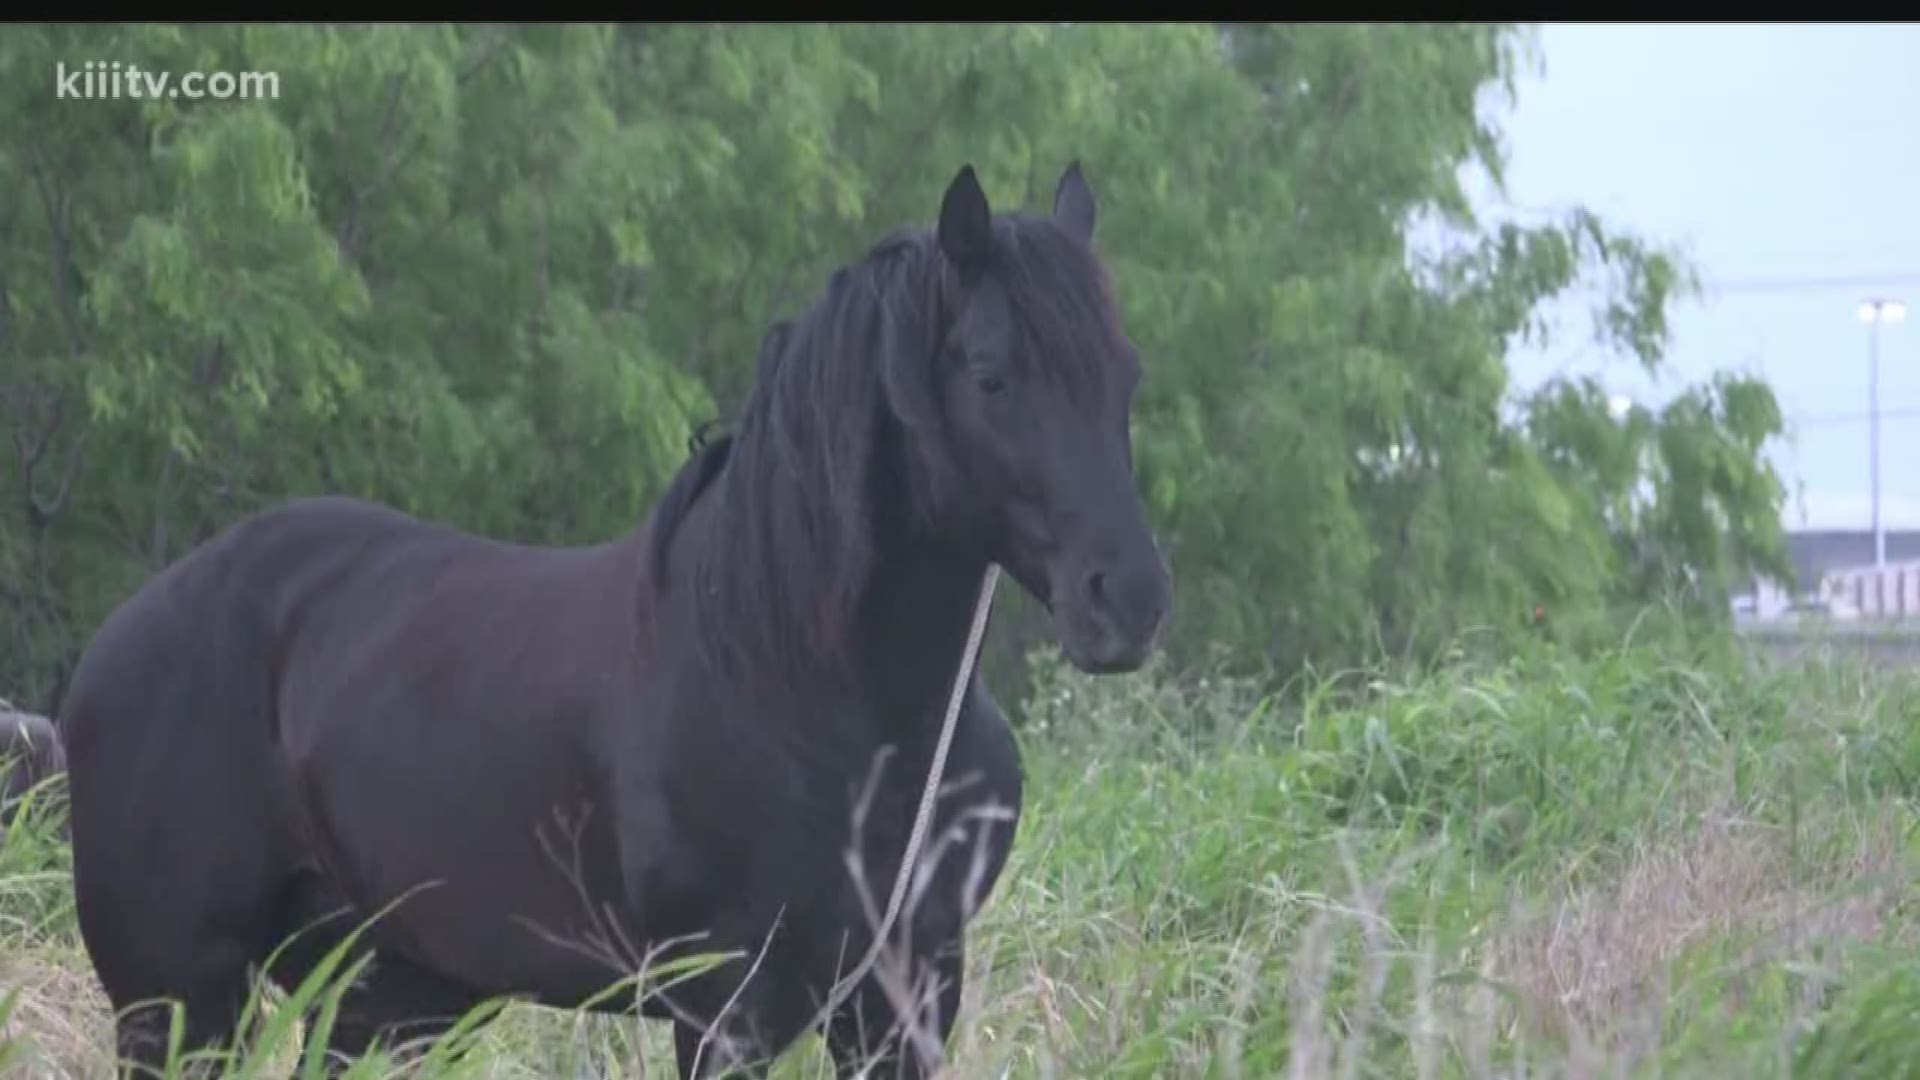 Corpus Christi police received a call around 7 a.m. Monday about a horse running loose on I-37.